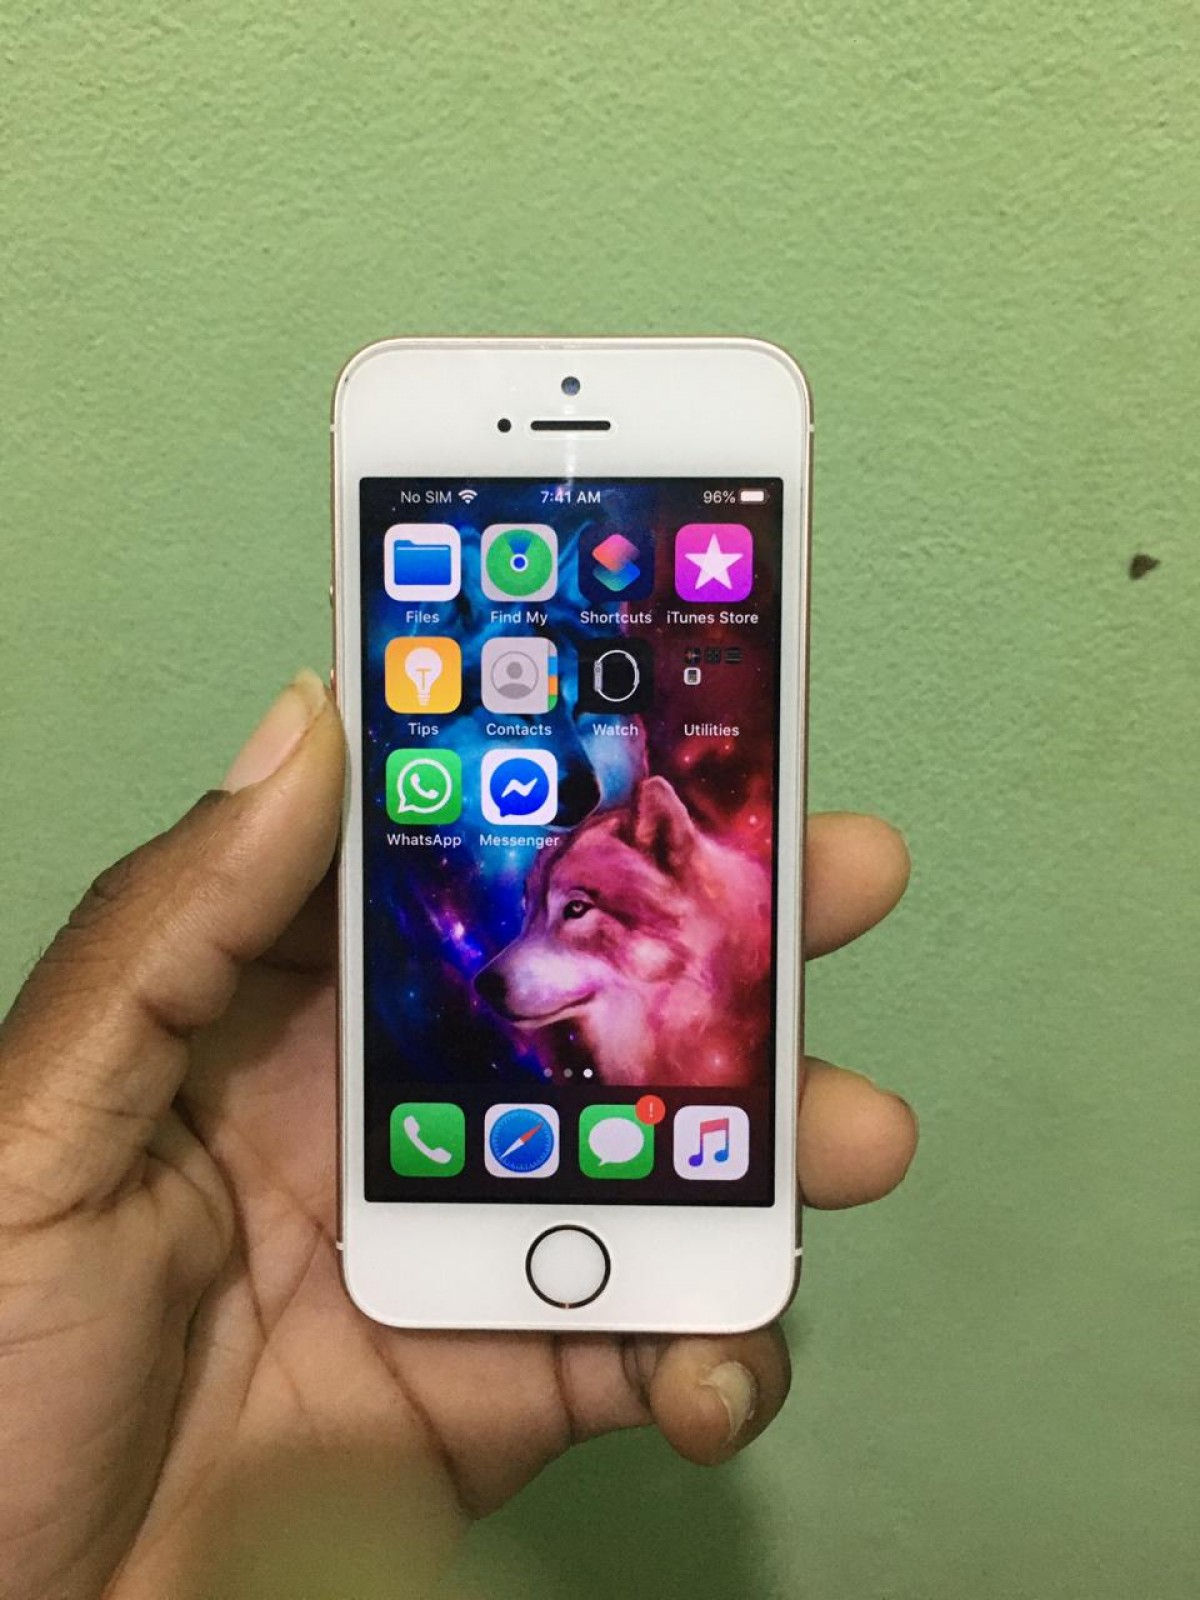 IPhone SE 32GB SIM CARD PICK UP ON AND OFF for sale in Kingston